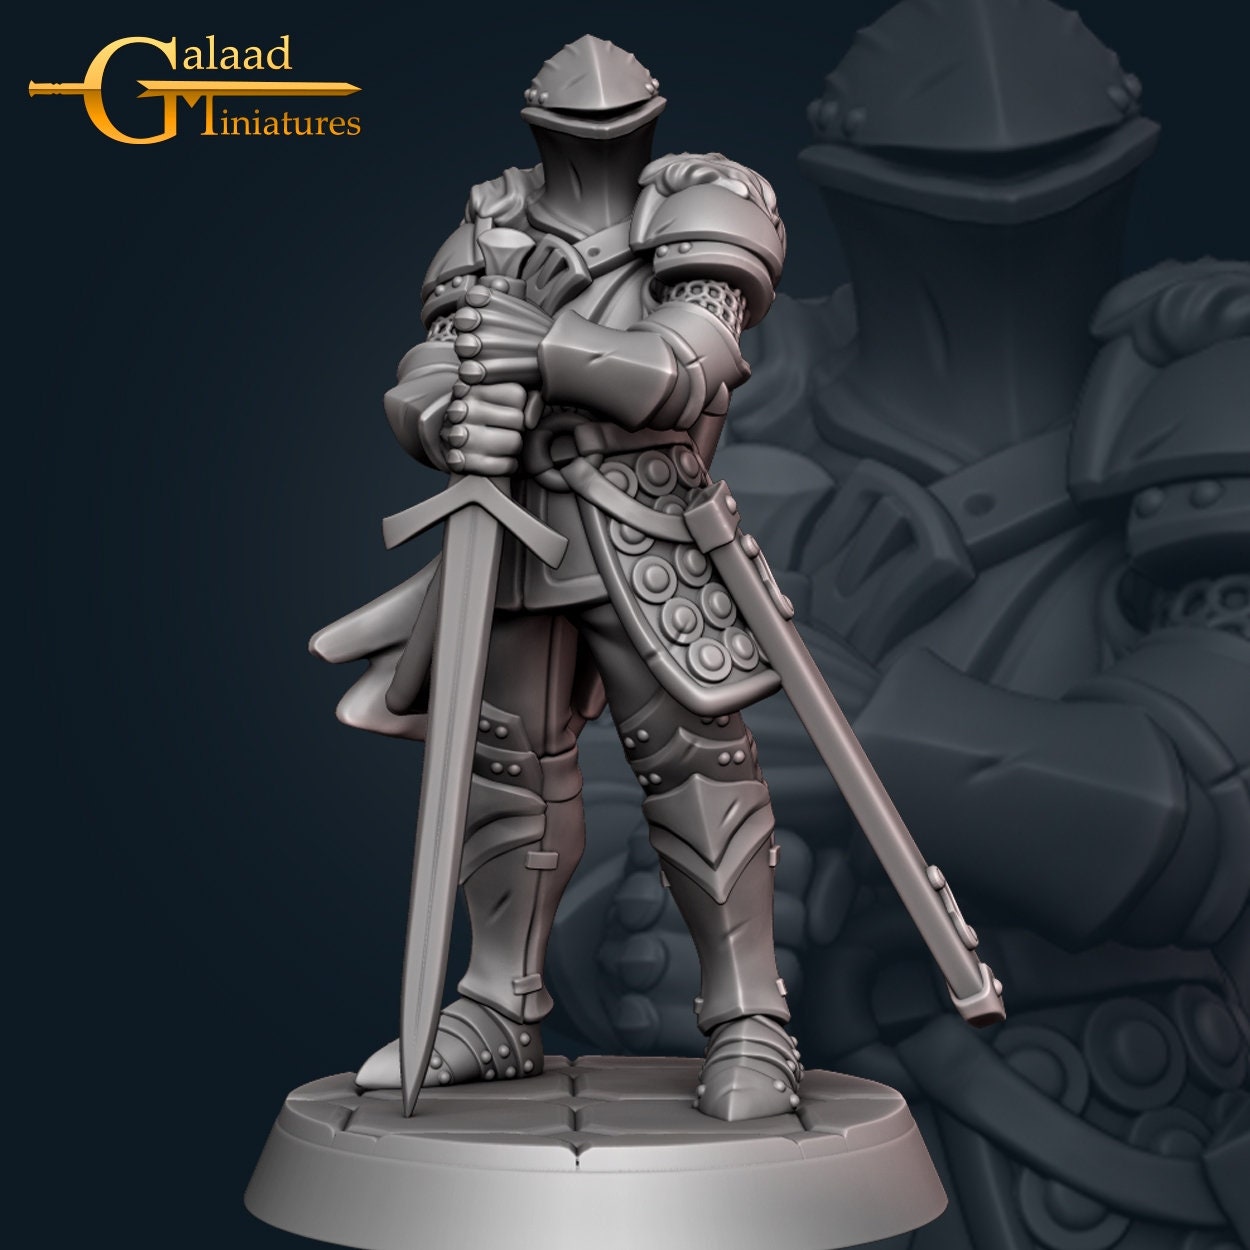 Male Human Cleric D&D miniature, by Galaad Miniatures // 3D Print on Demand / DnD / Pathfinder / RPG